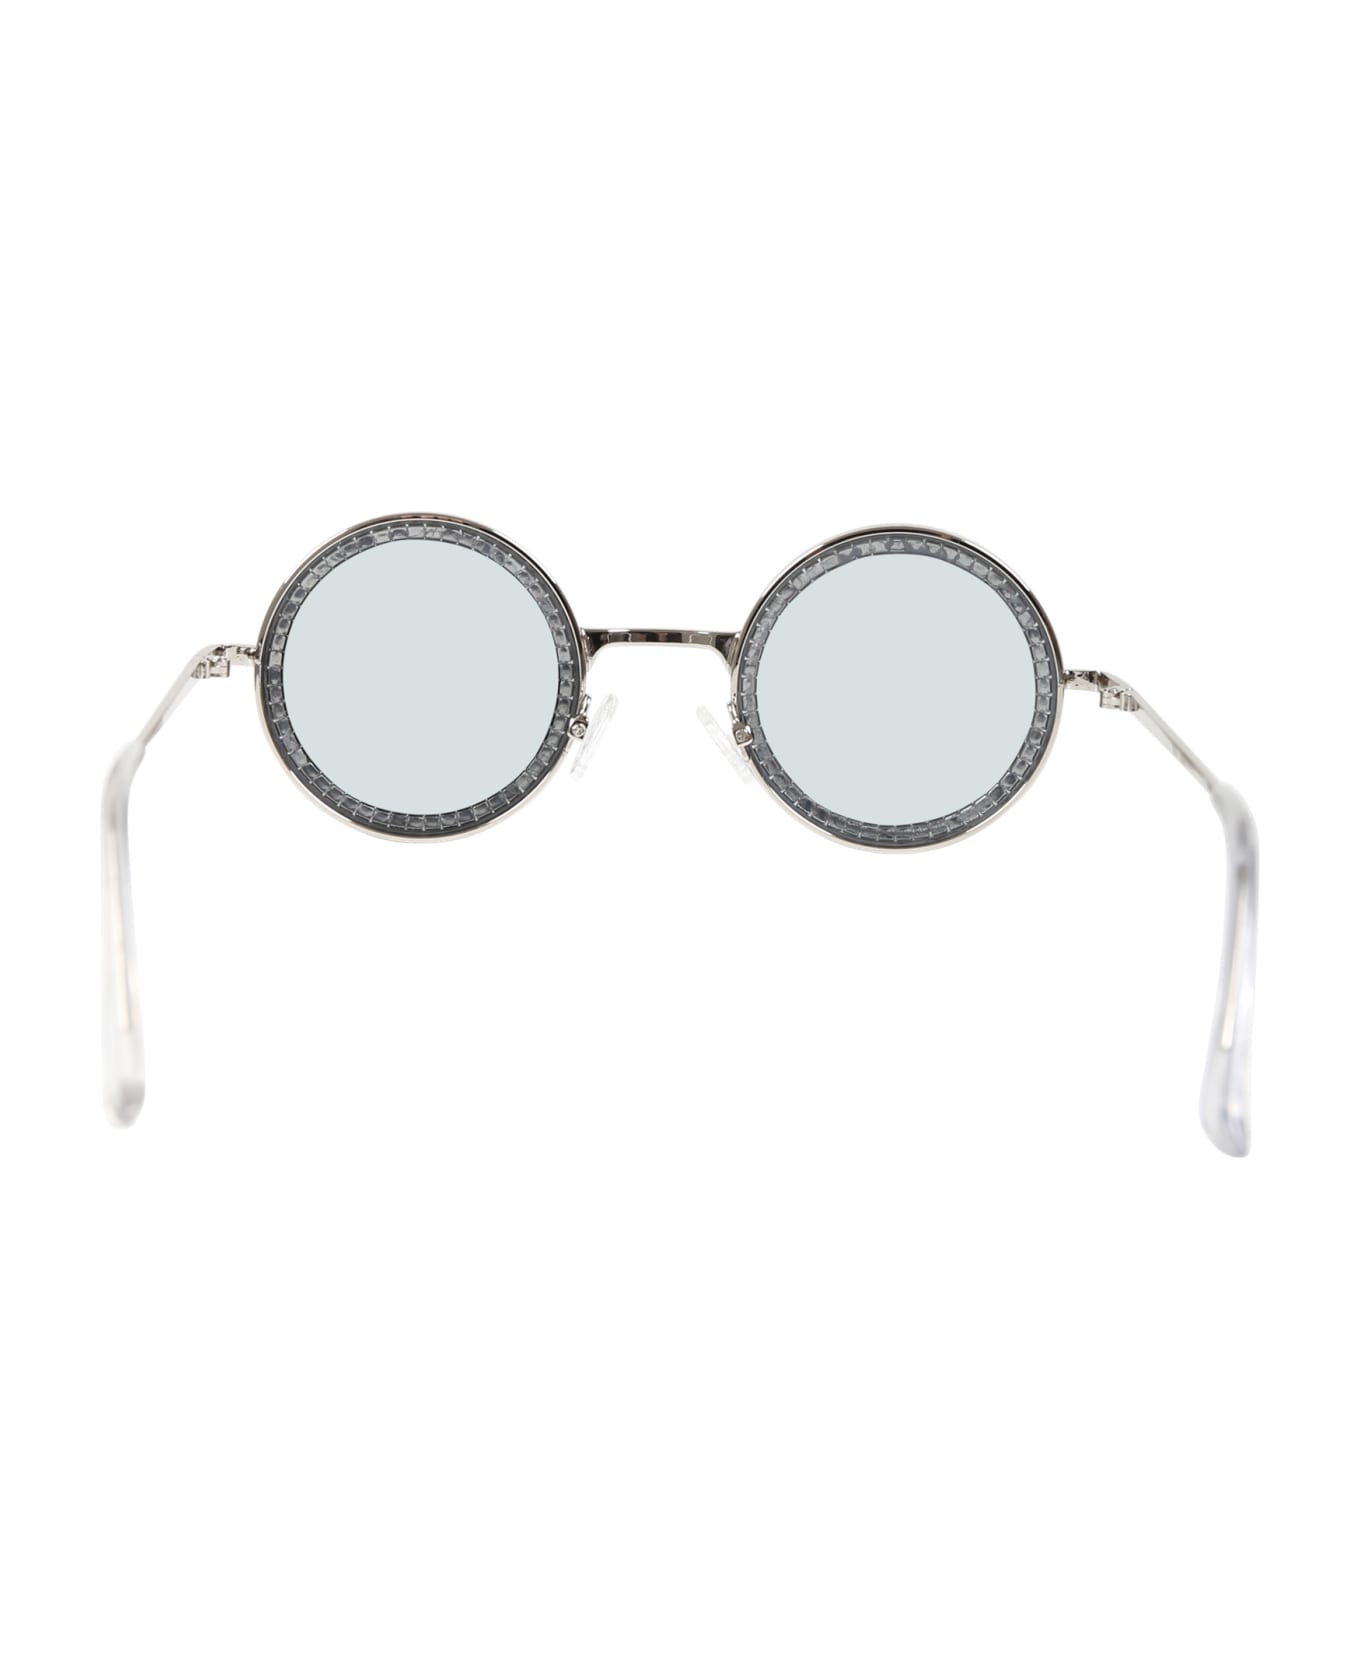 Monnalisa Silver Glasses For Girl With Rhinestones - Bianco